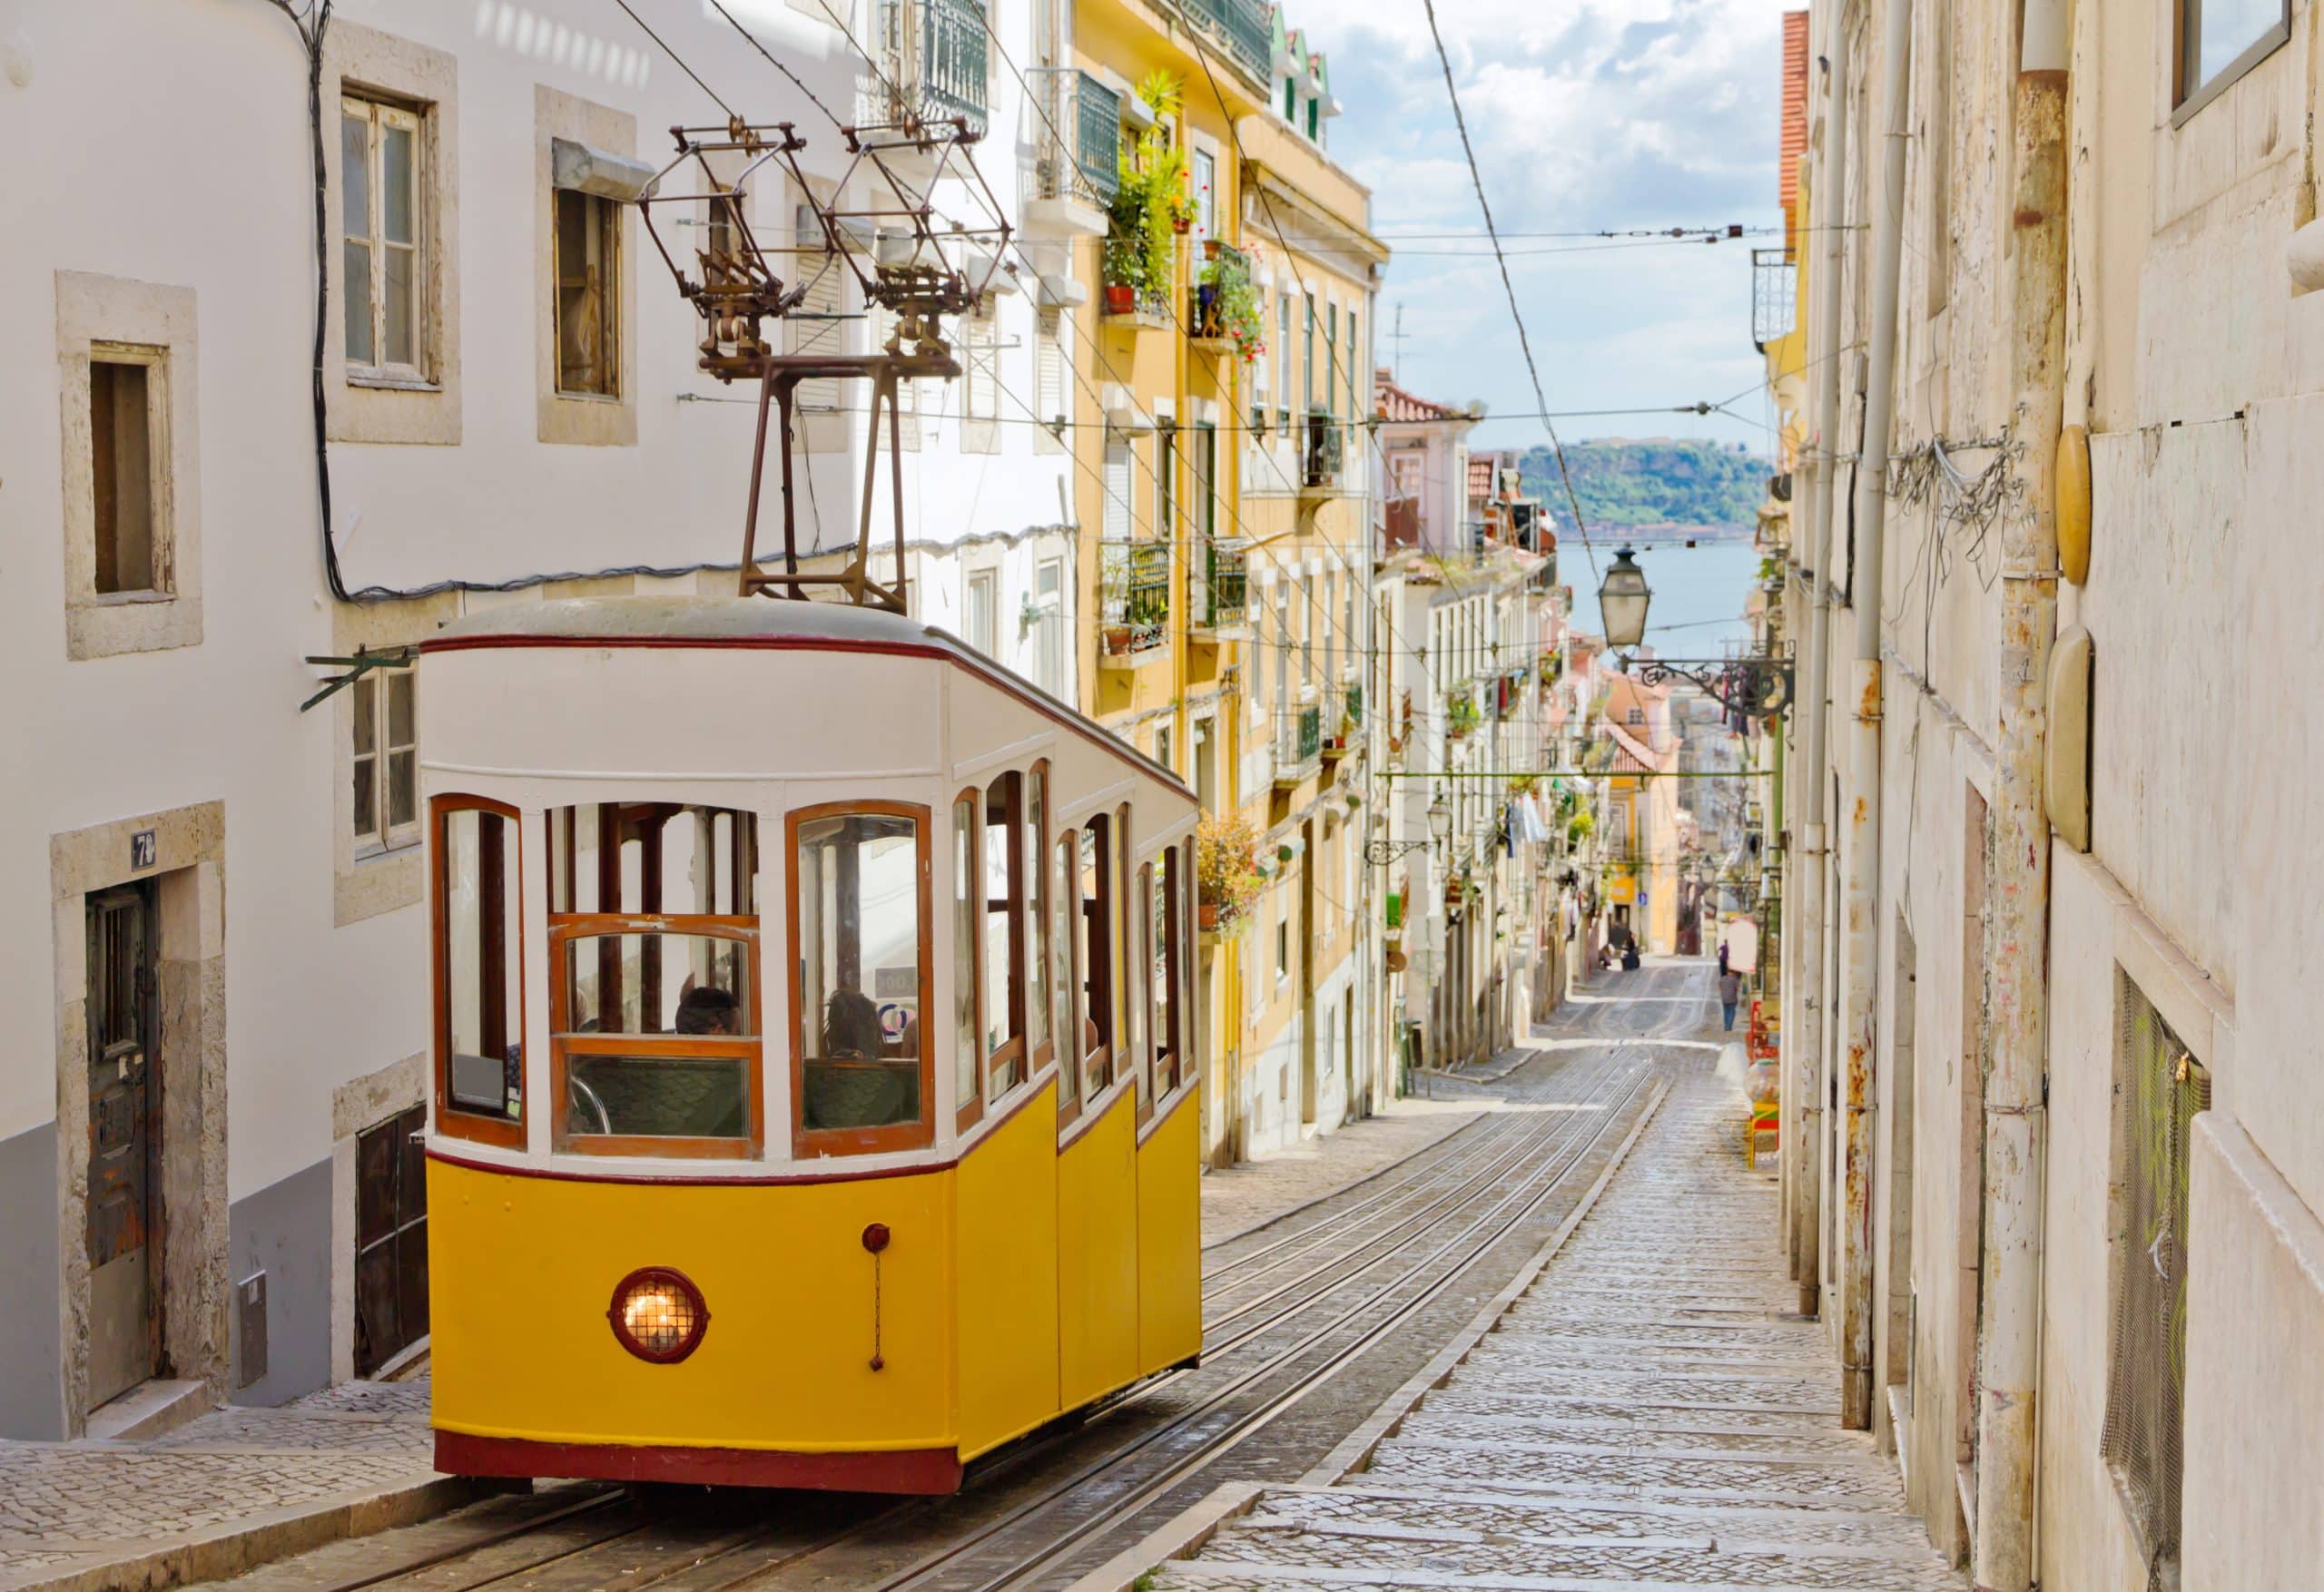 A classic yellow tram ascending a steep street in Lisbon, surrounded by historic buildings